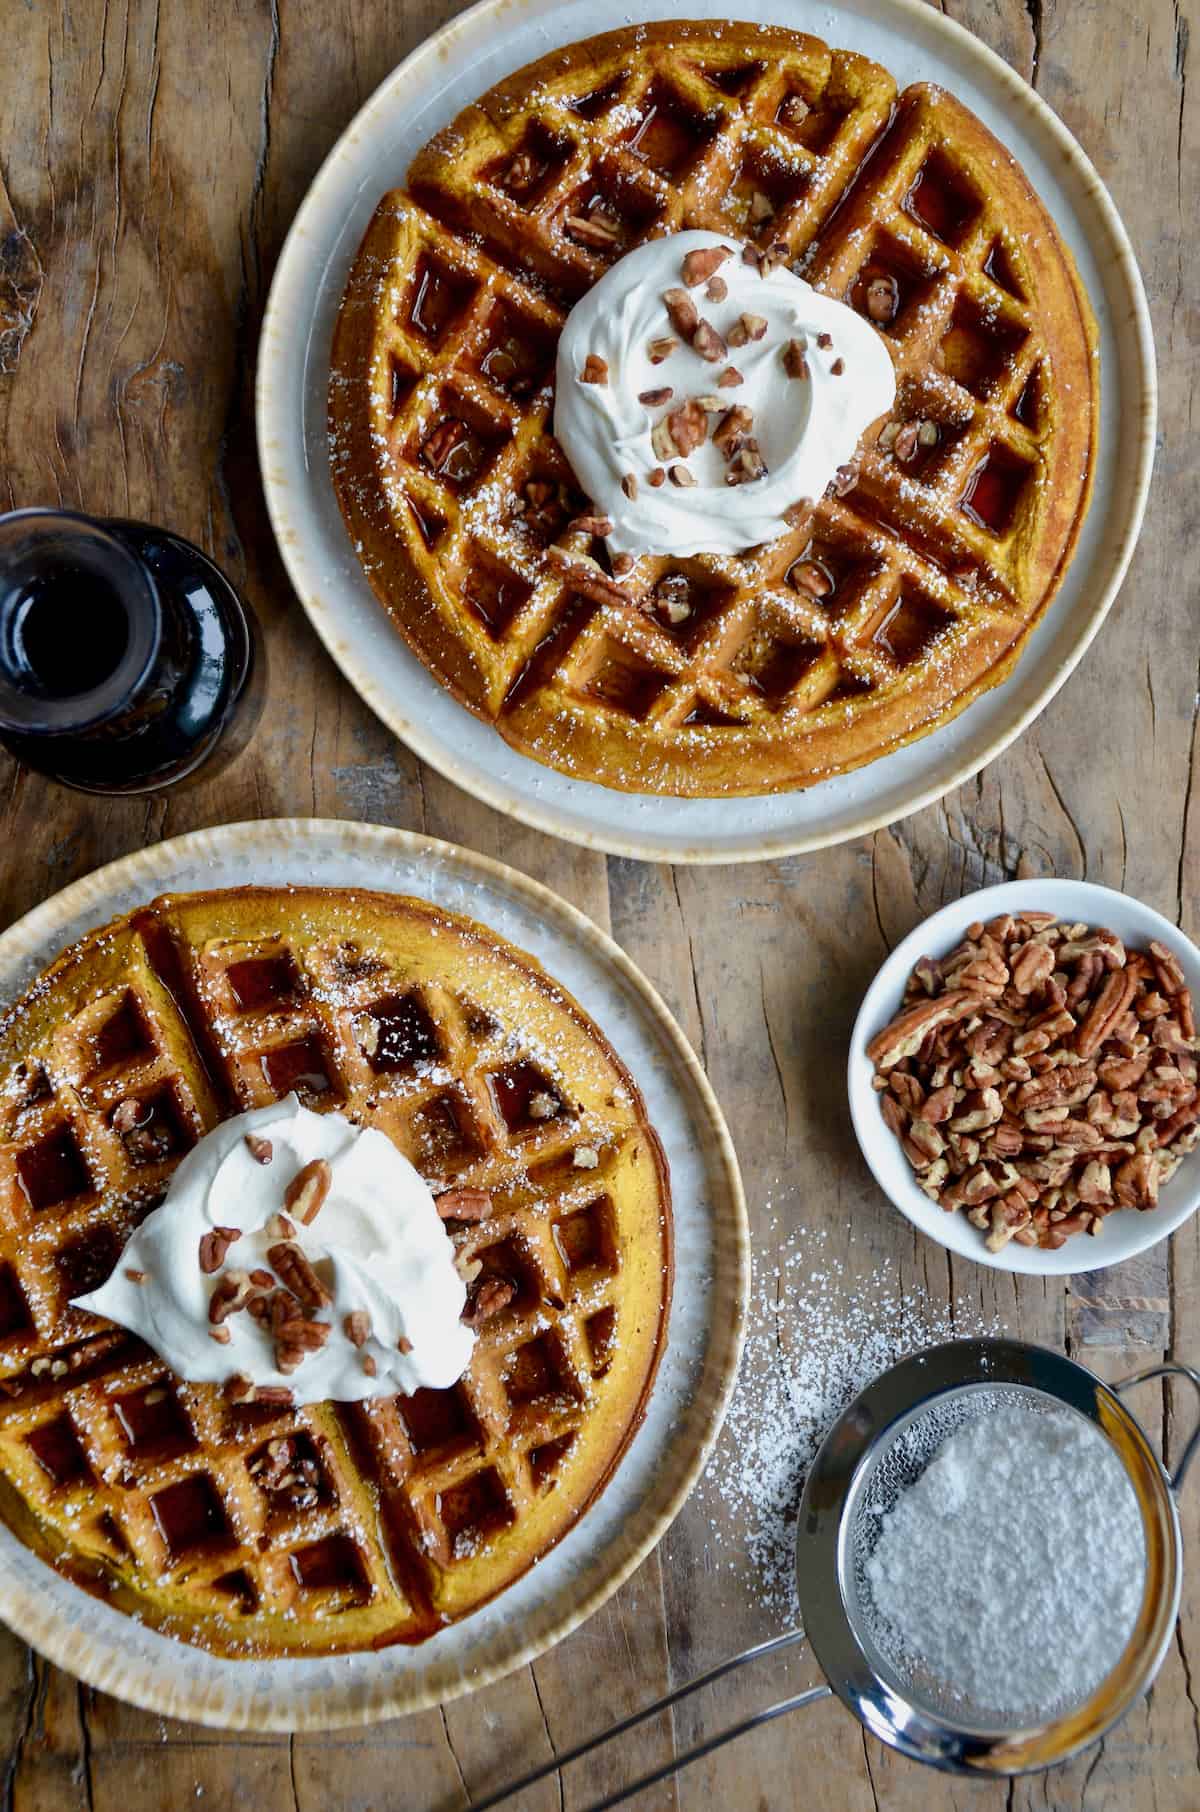 Two plates each hold a Pumpkin Spice Waffle, topped with a dollop of whipped cream, a drizzle of syrup, and a sprinkle of pecans. Nearby is a glass pitcher of maple syrup, a dish of chopped nuts, and a sifter with powdered sugar.